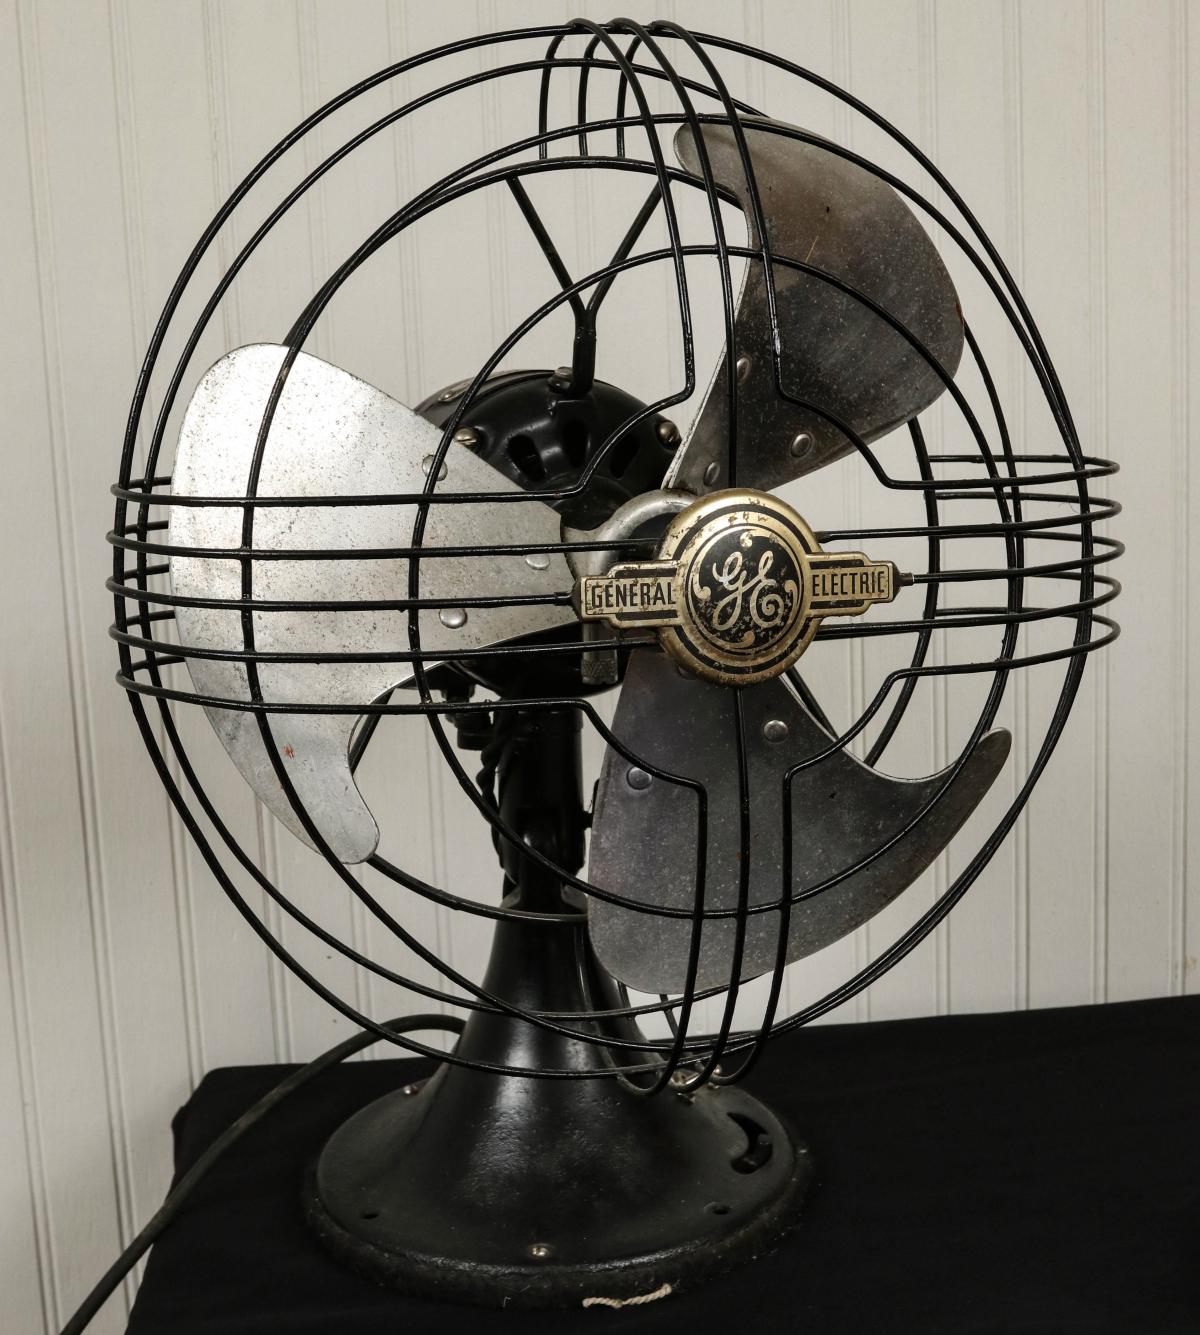 A VINTAGE, OSCILLATING GENERAL ELECTRIC TABLE FAN